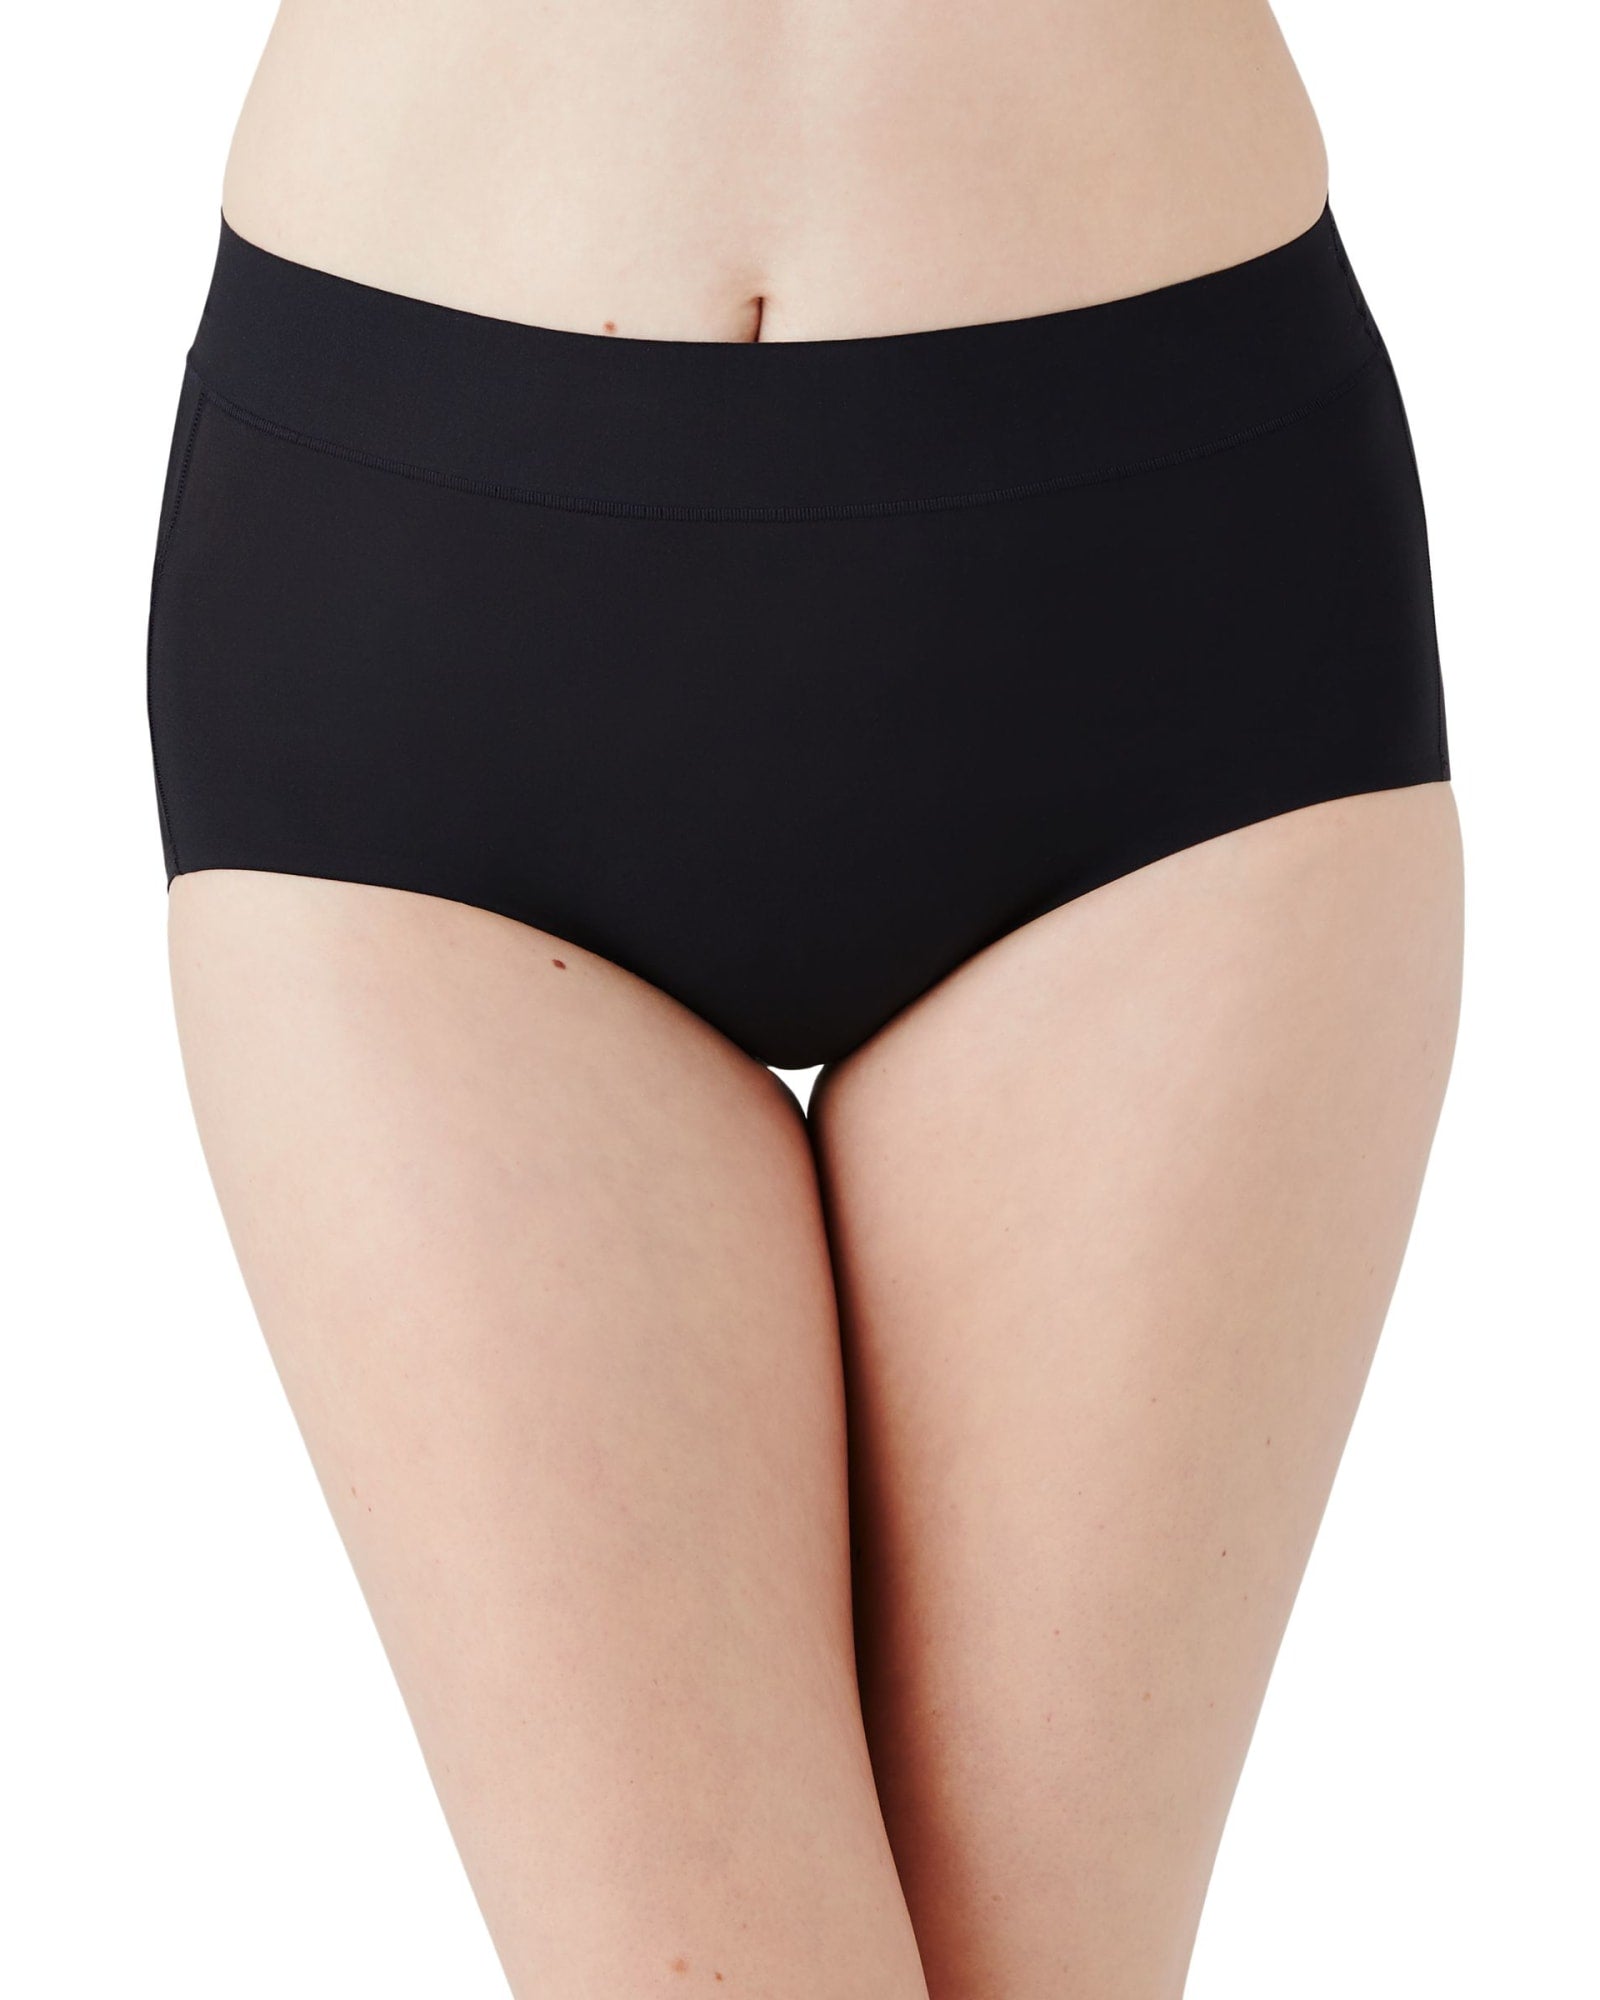 EBY - Soft, comfortable, sexy, flattering and seamless? We got you